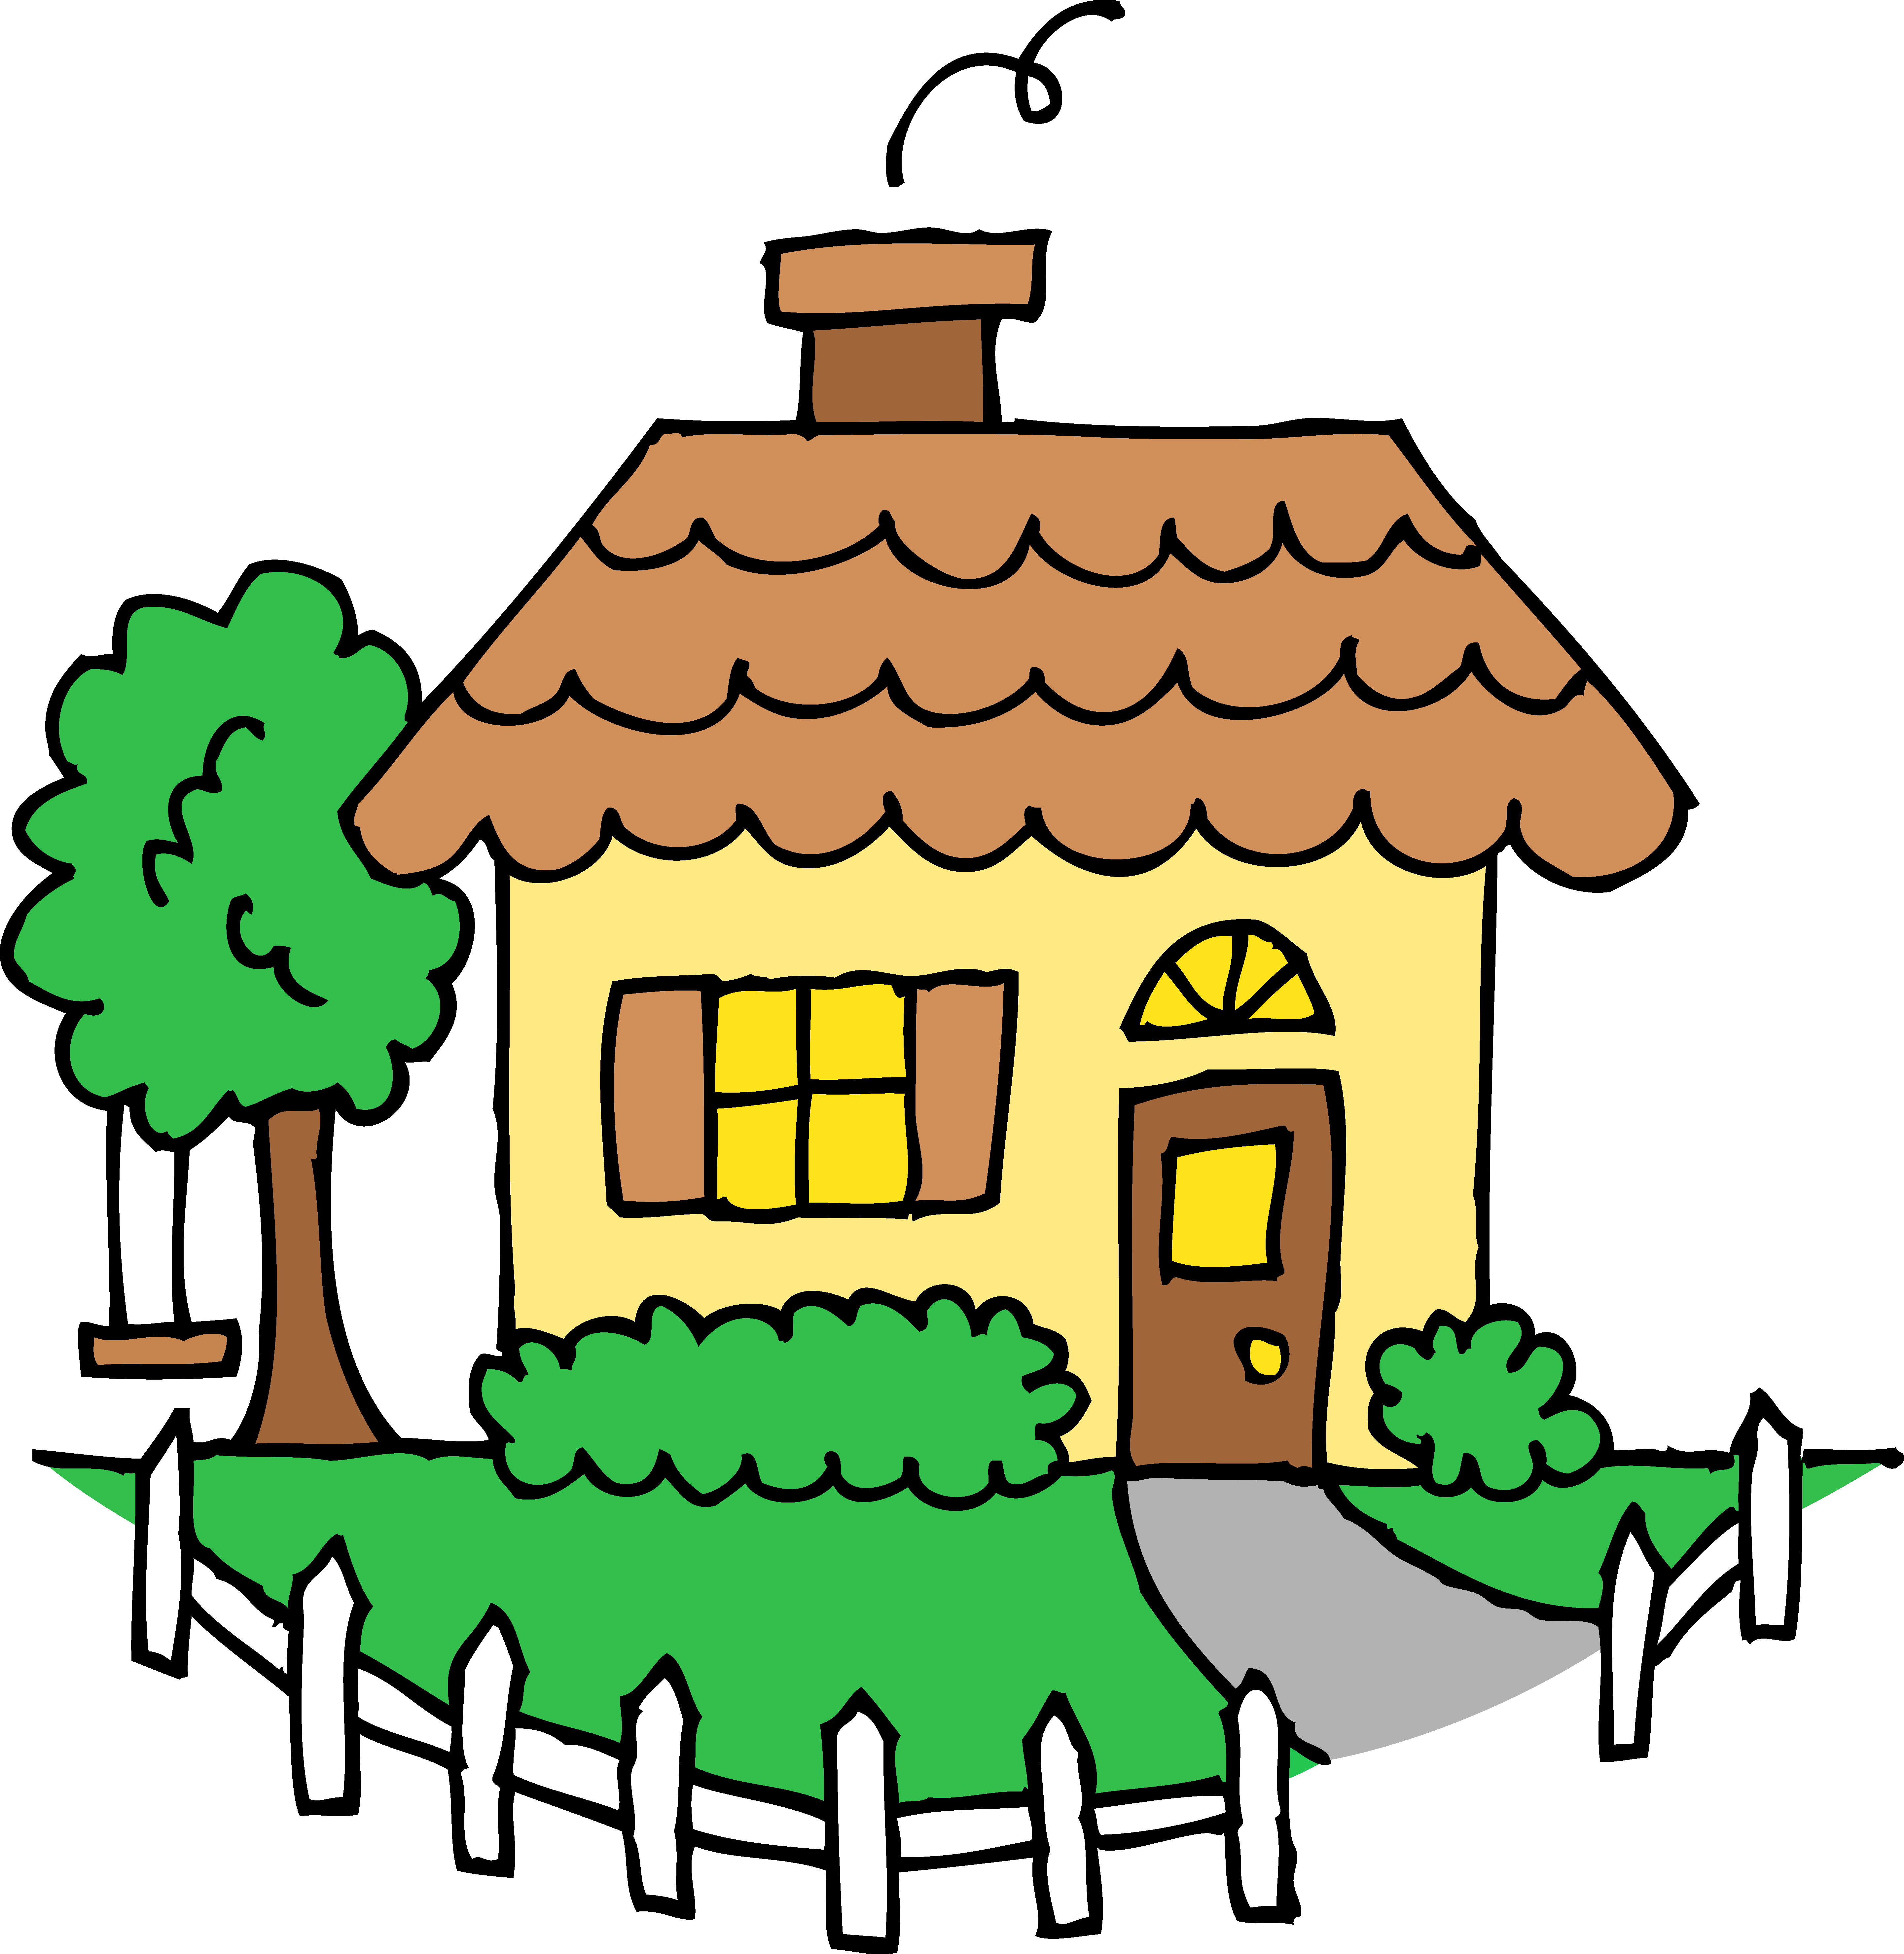 Free Images Of Houses - Clipa - Free House Clip Art